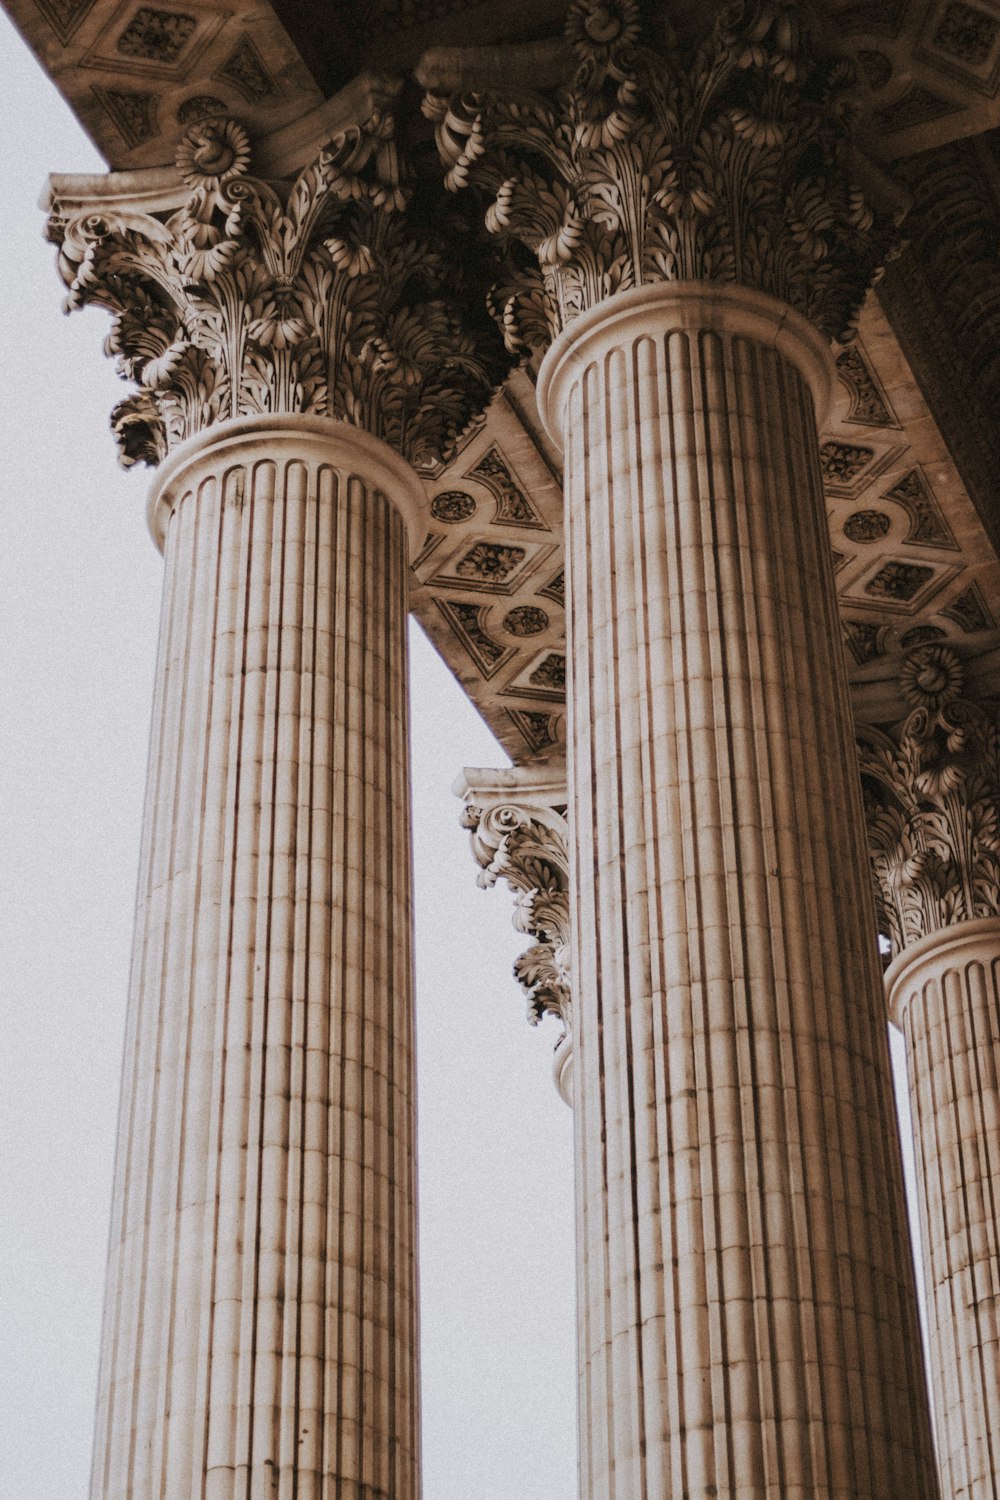 a group of pillars with a clock on each of them